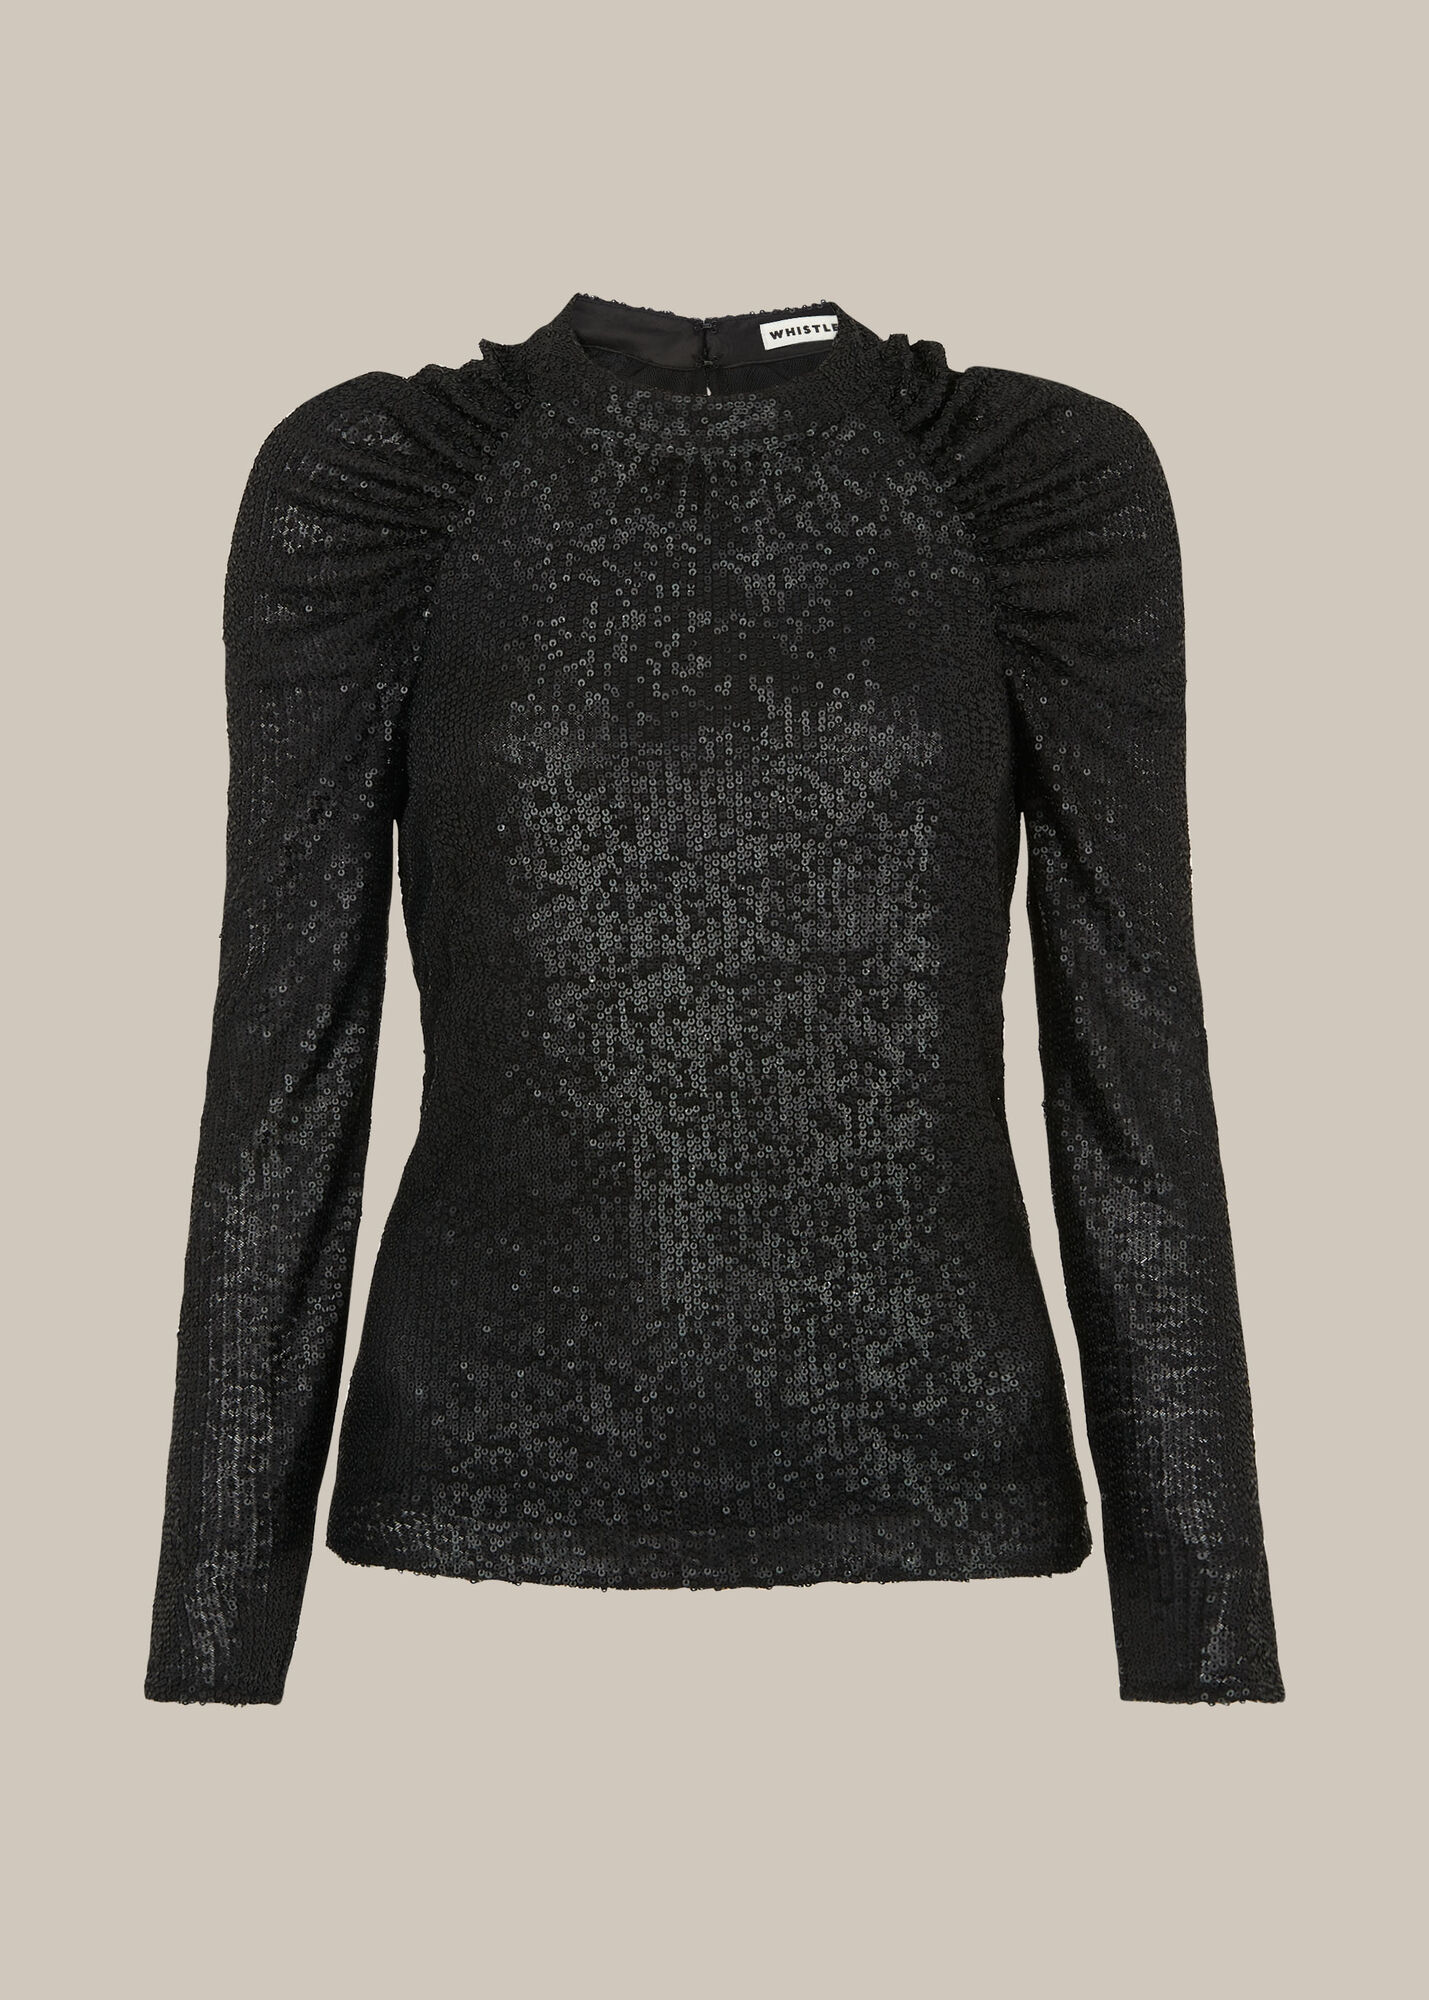 Black Sequin Long Sleeve Top | WHISTLES